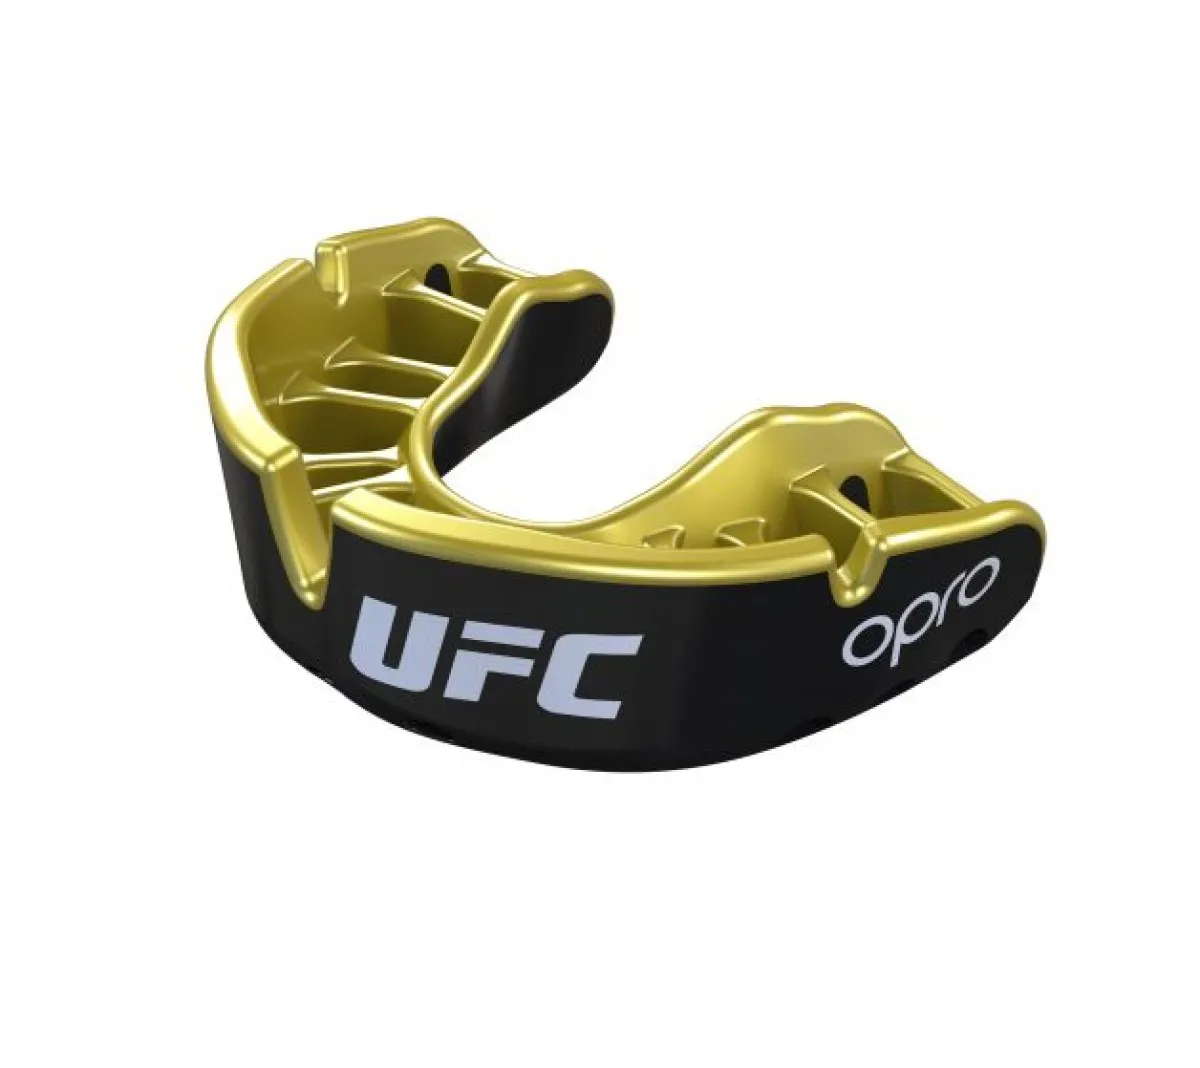 OPRO protector bucal UFC Silver - rojo/negro, SeniorOPRO protector bucal UFC Gold - rojo/plata, SeniorOPRO protector bucal UFC Gold - negro/oro, Senior